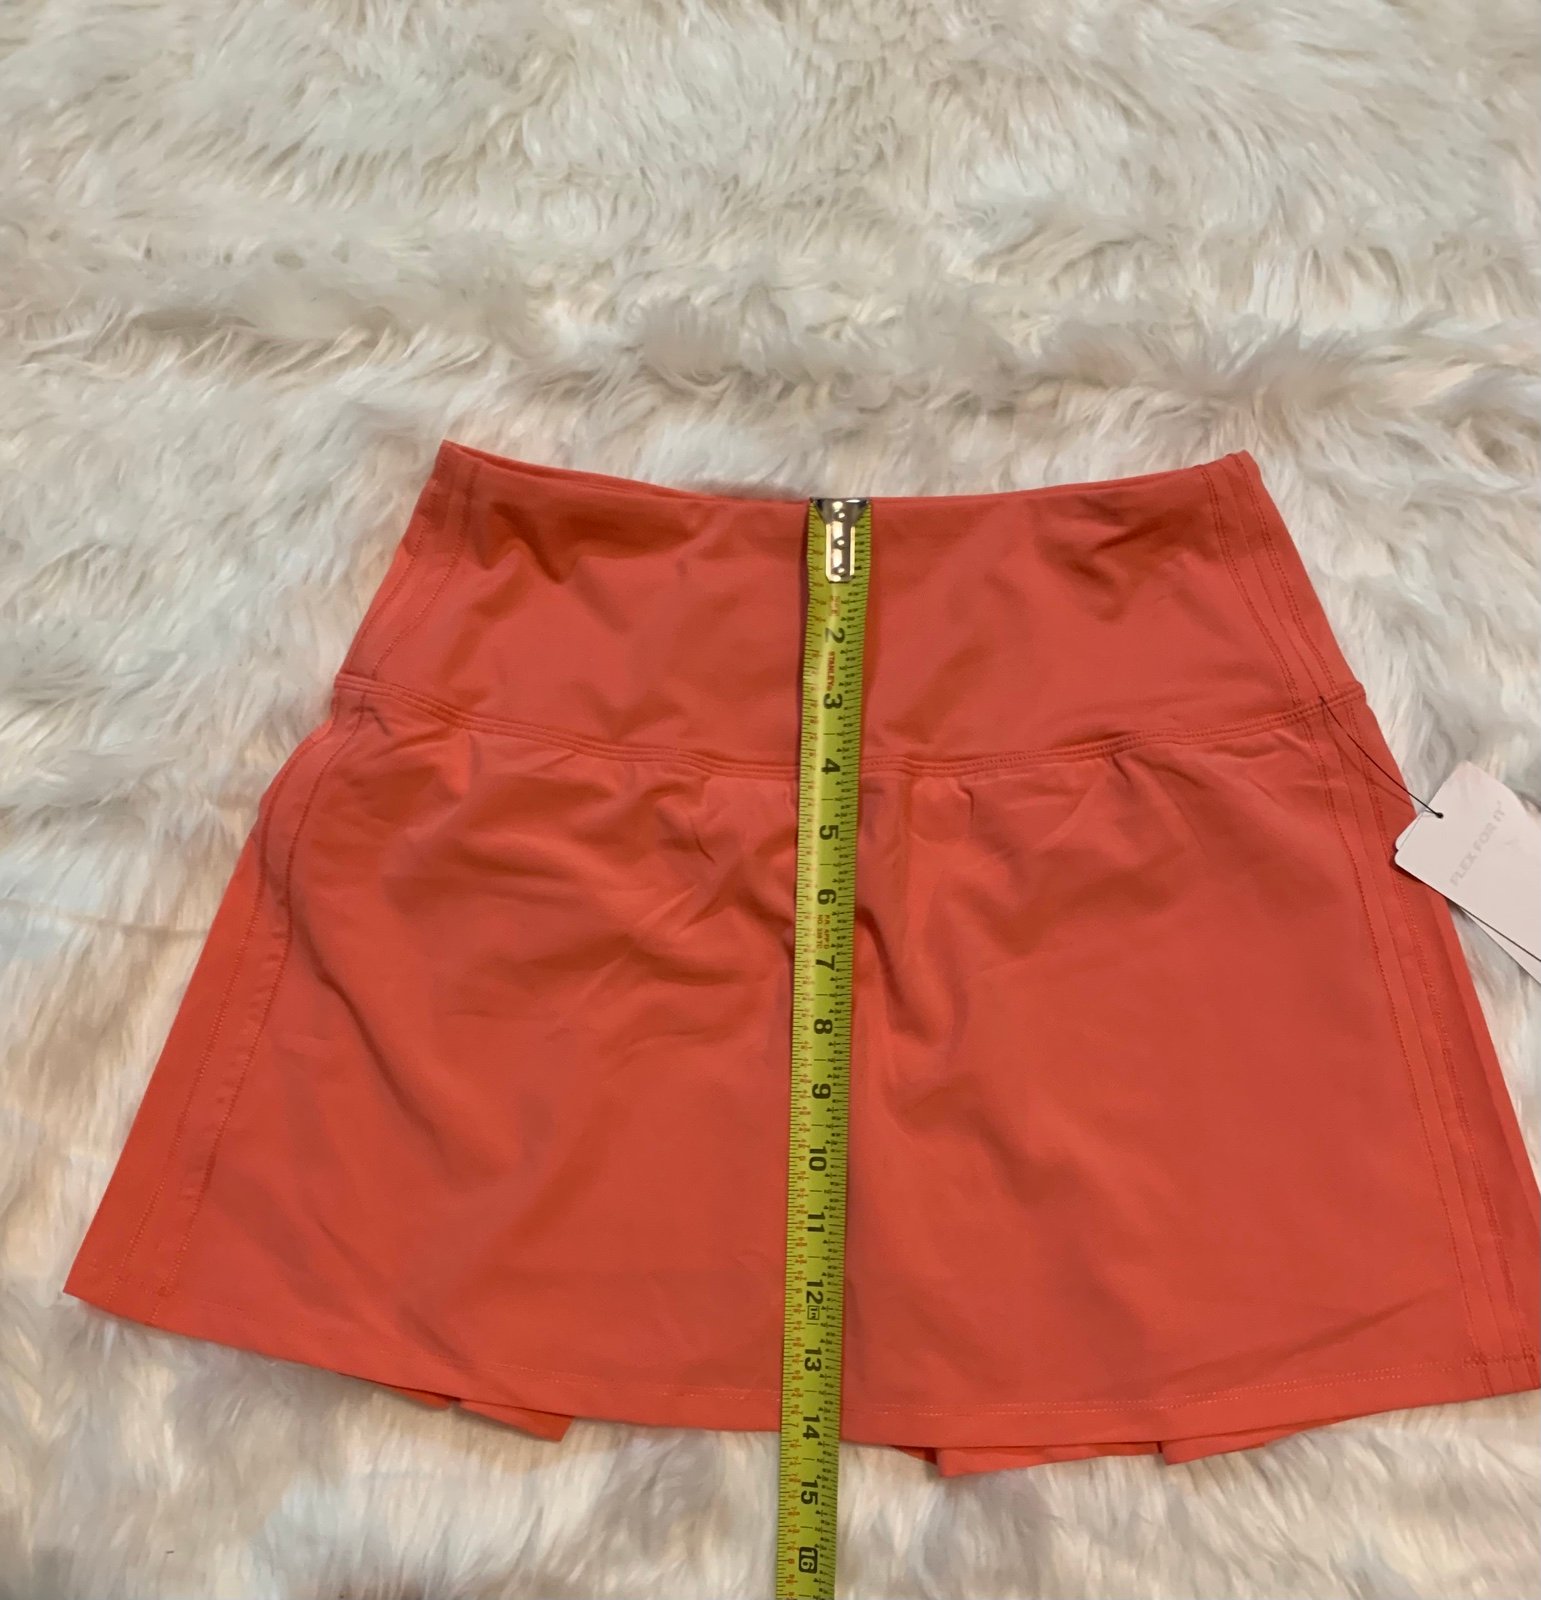 Discounted Women Tennis Skort S NWT n4m8xiQet for sale